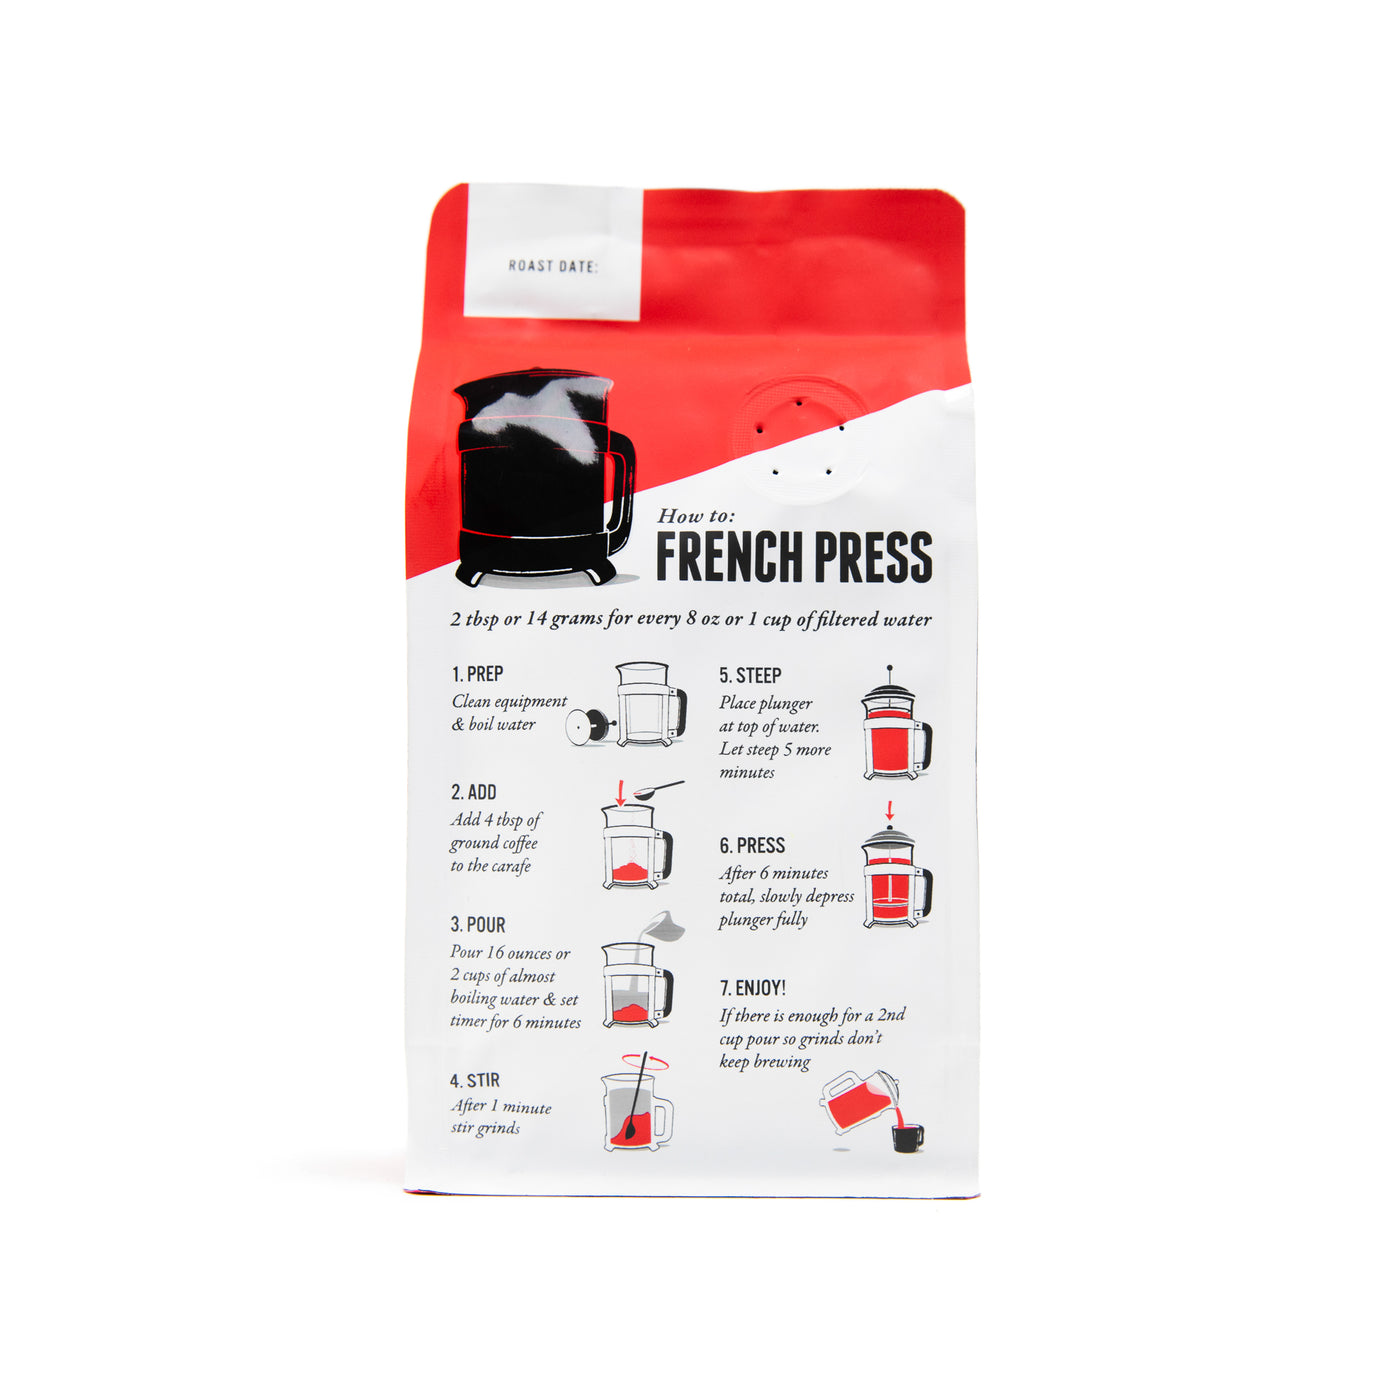 French Press: Birch Blend Subscription